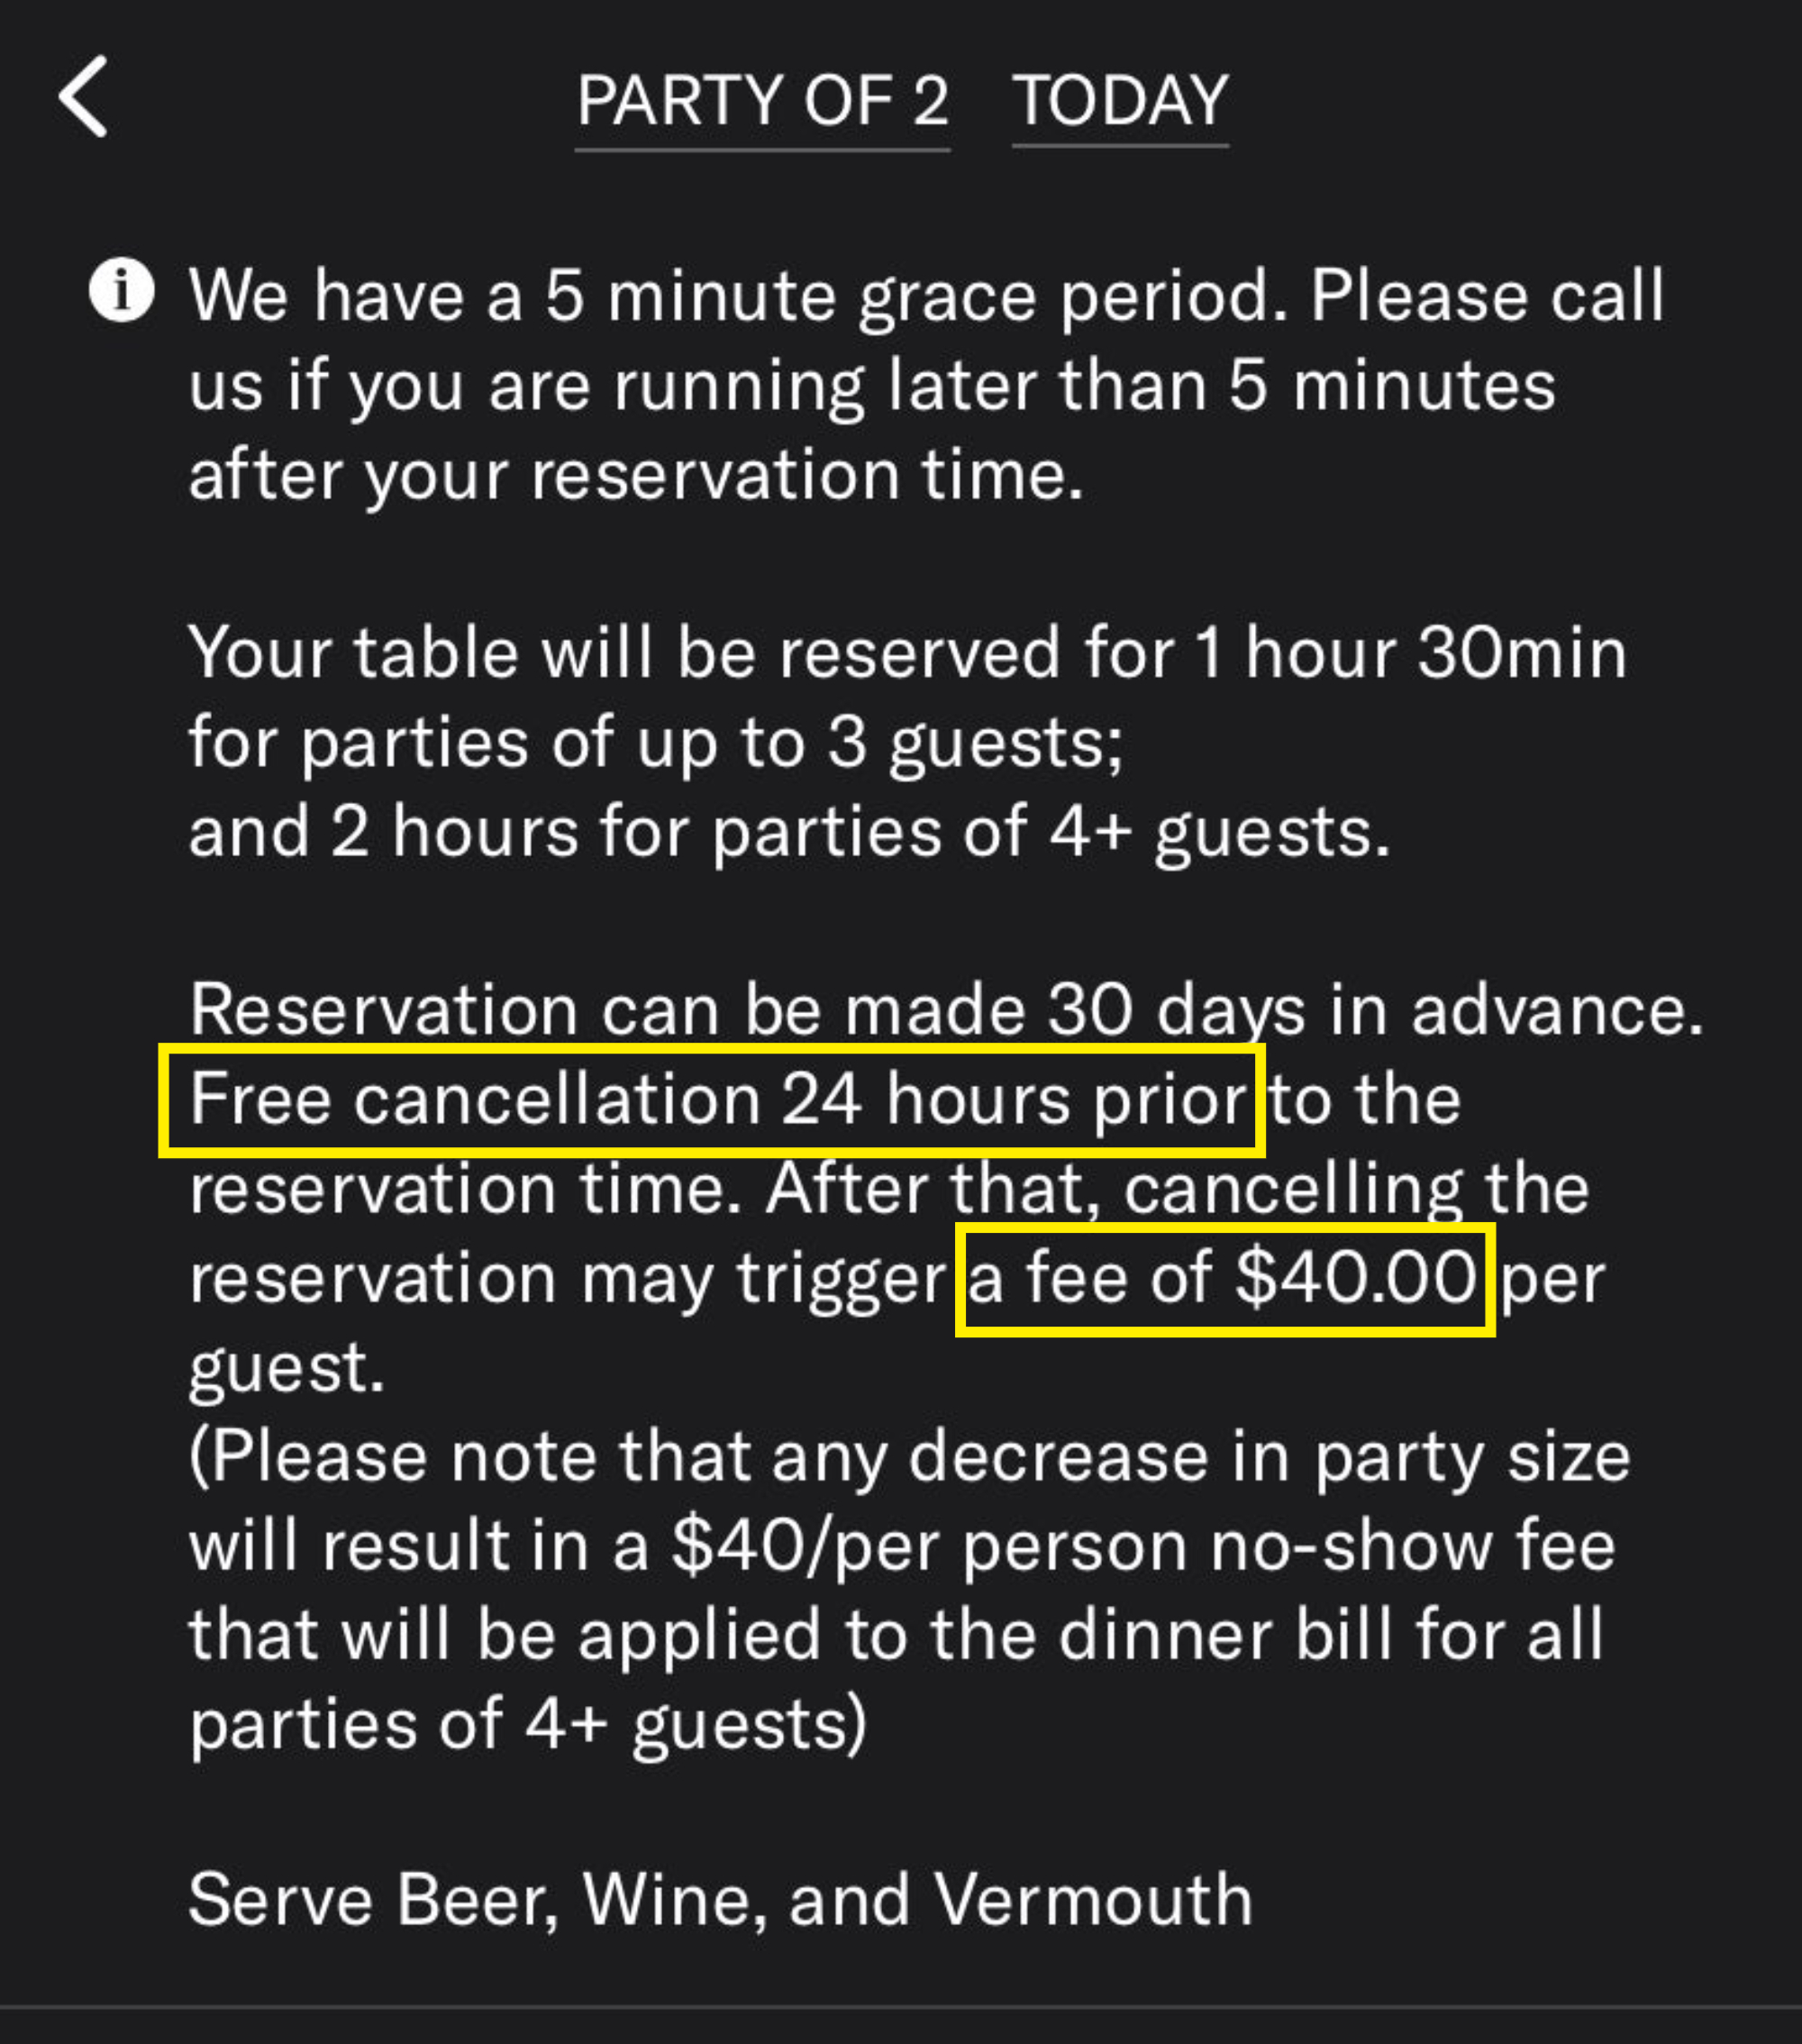 Restaurant reservation policy notice explaining fees for no-shows ($40/guest) and cancellations ($40/guest) and late arrivals policy (5-minute grace period w/o phone call)